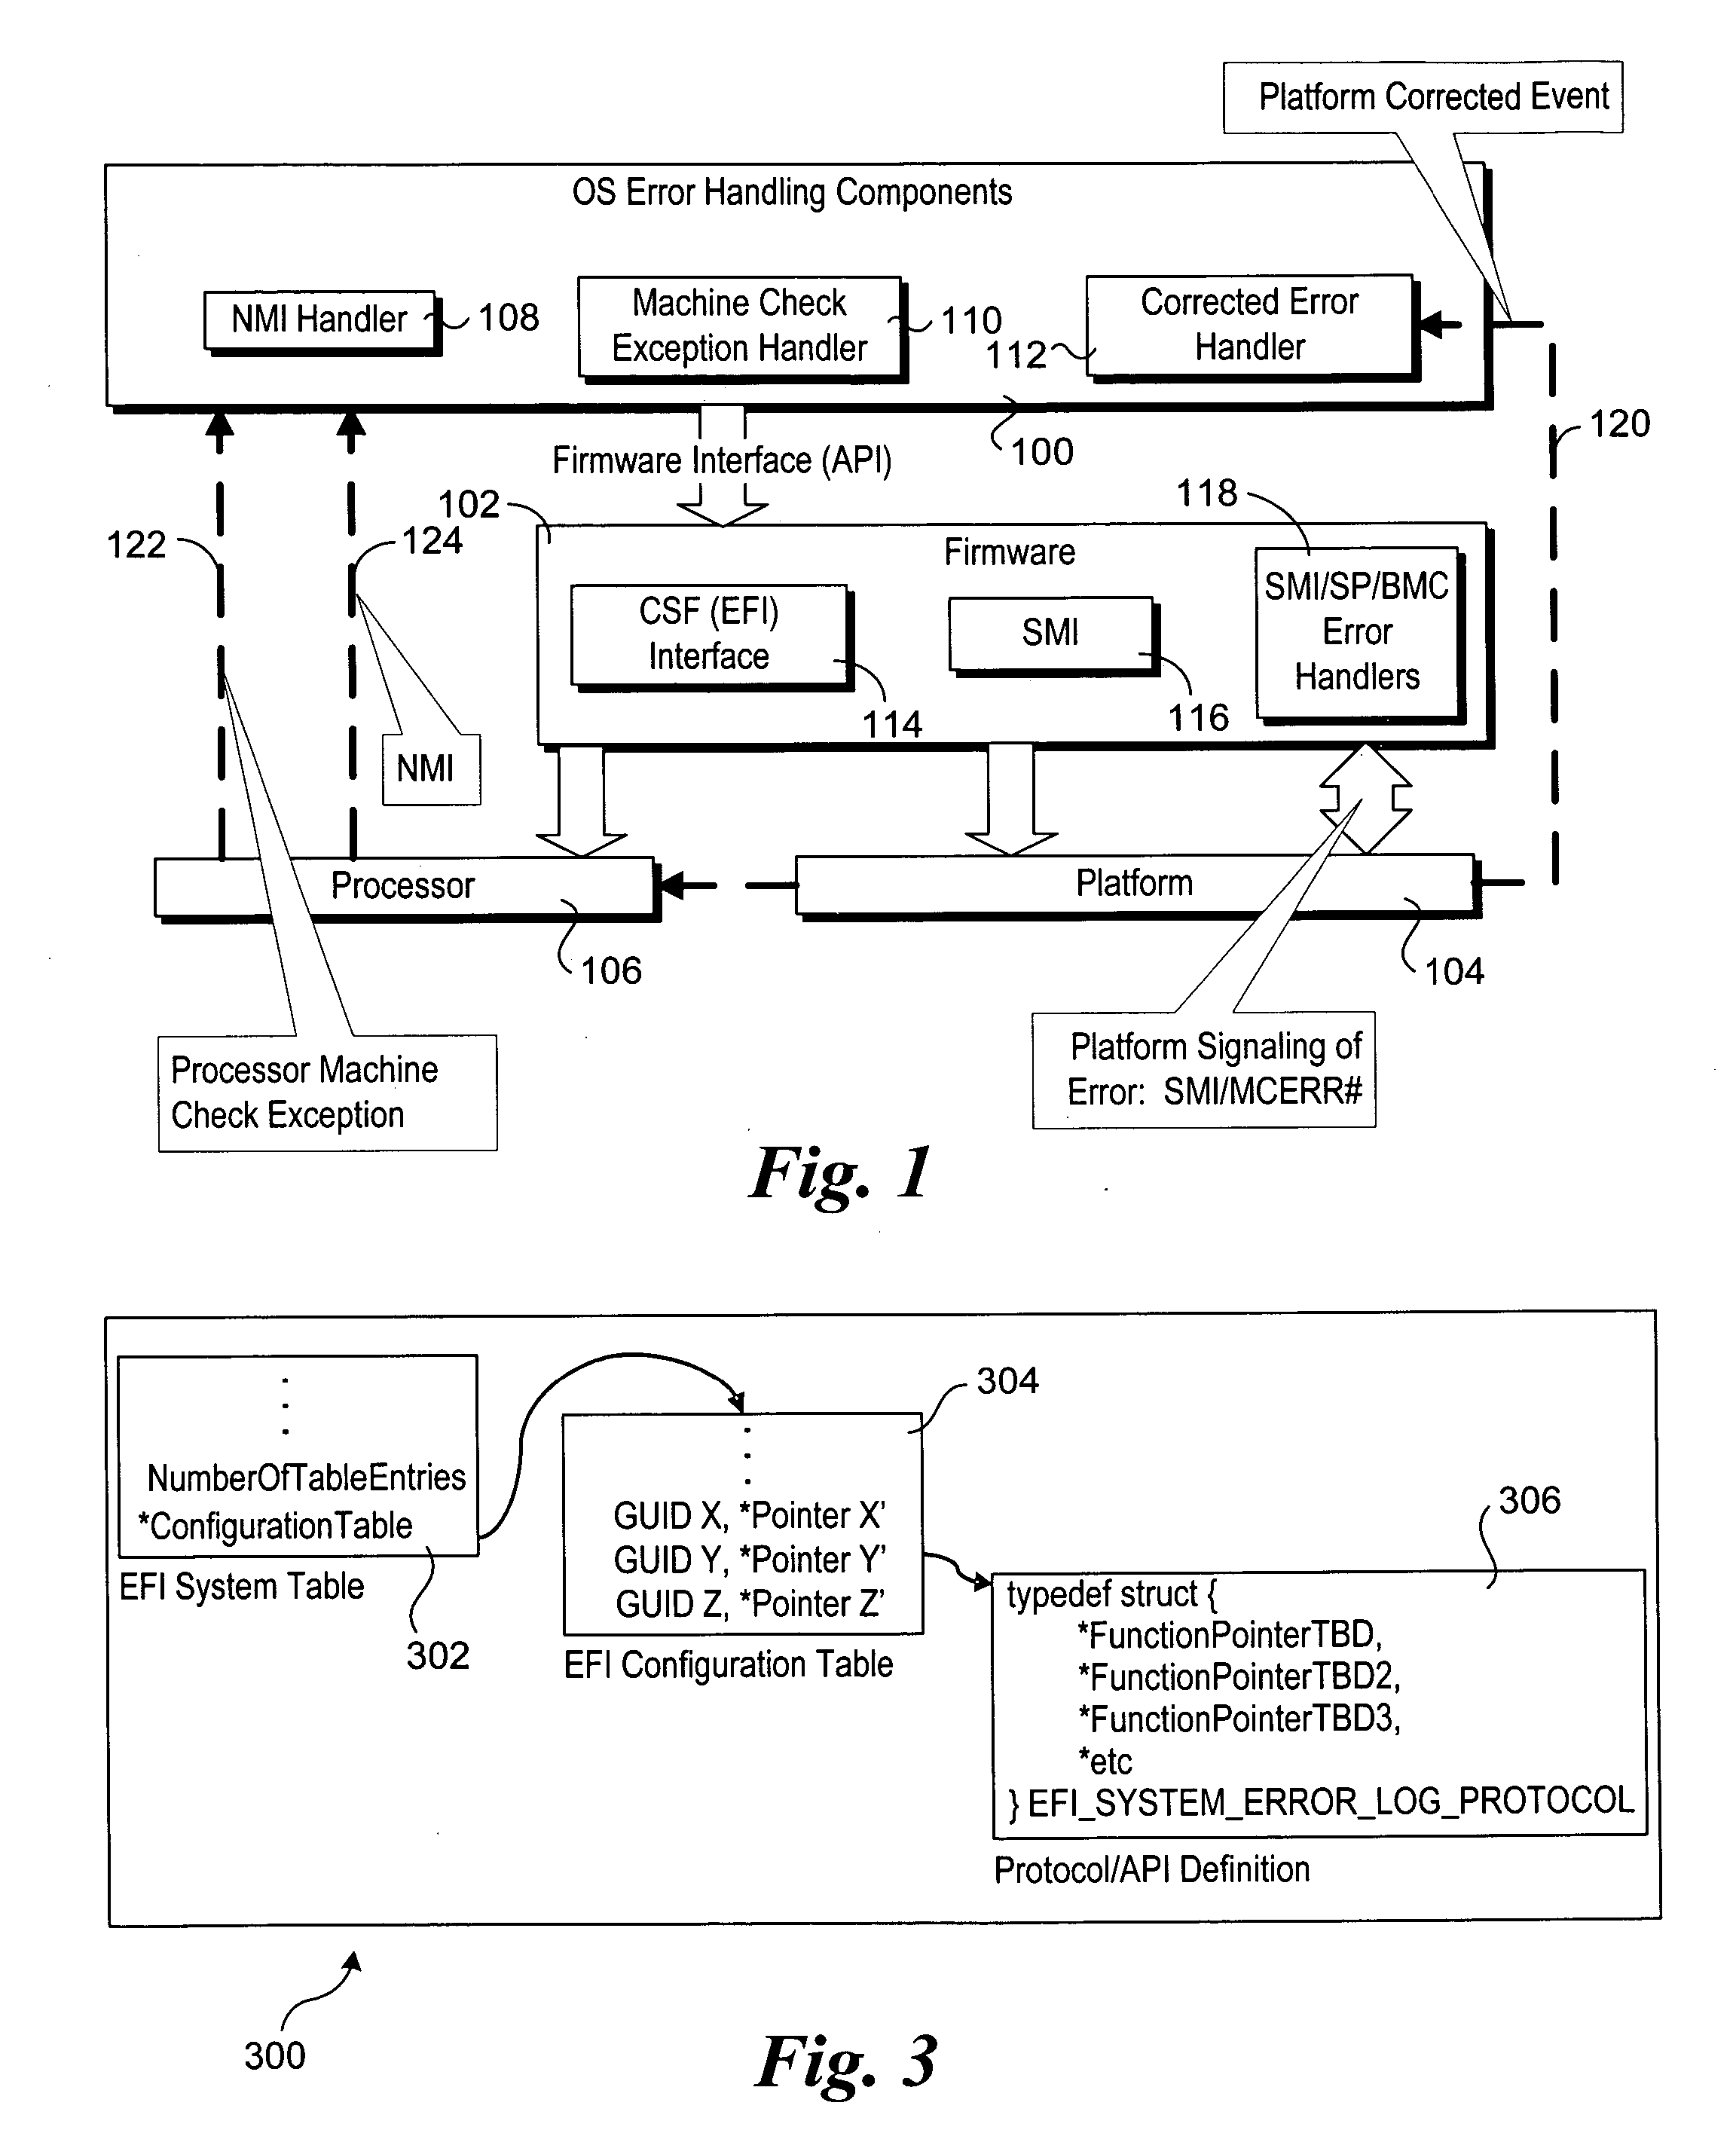 OS and firmware coordinated error handling using transparent firmware intercept and firmware services